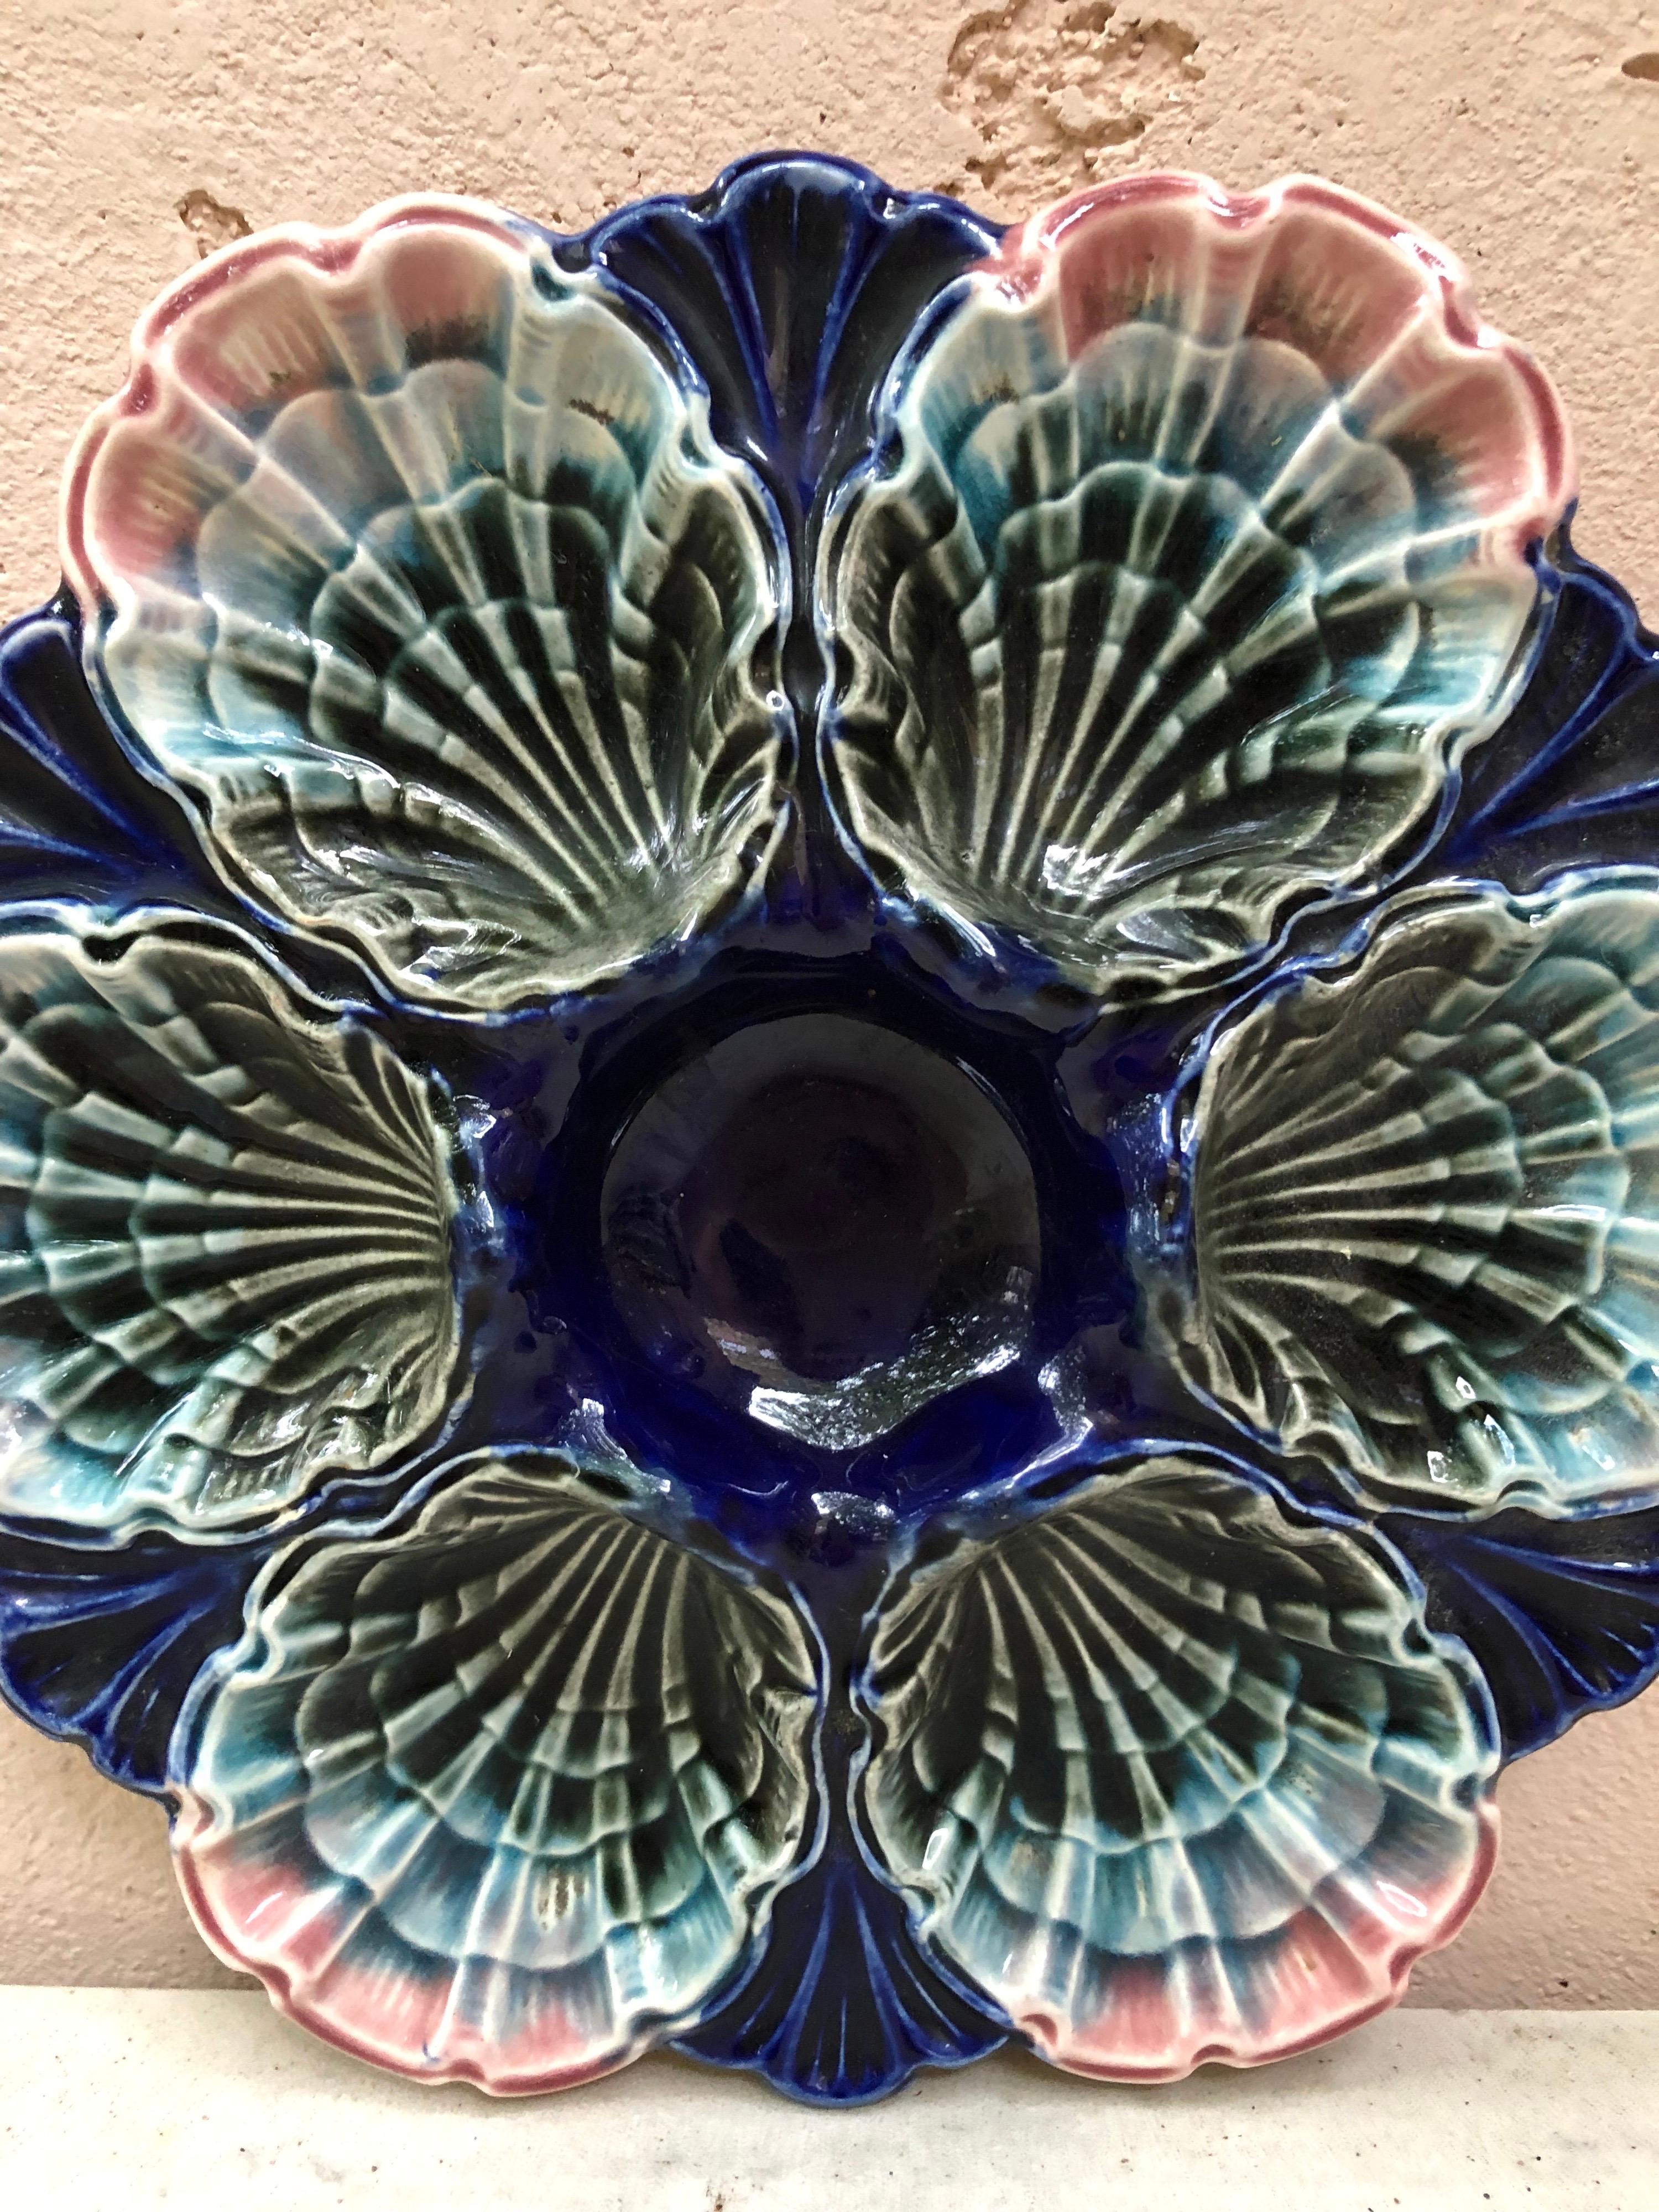 Very rare French Majolica dark blue, pink and grey oyster plate unsigned from Fives Lille, circa 1890.